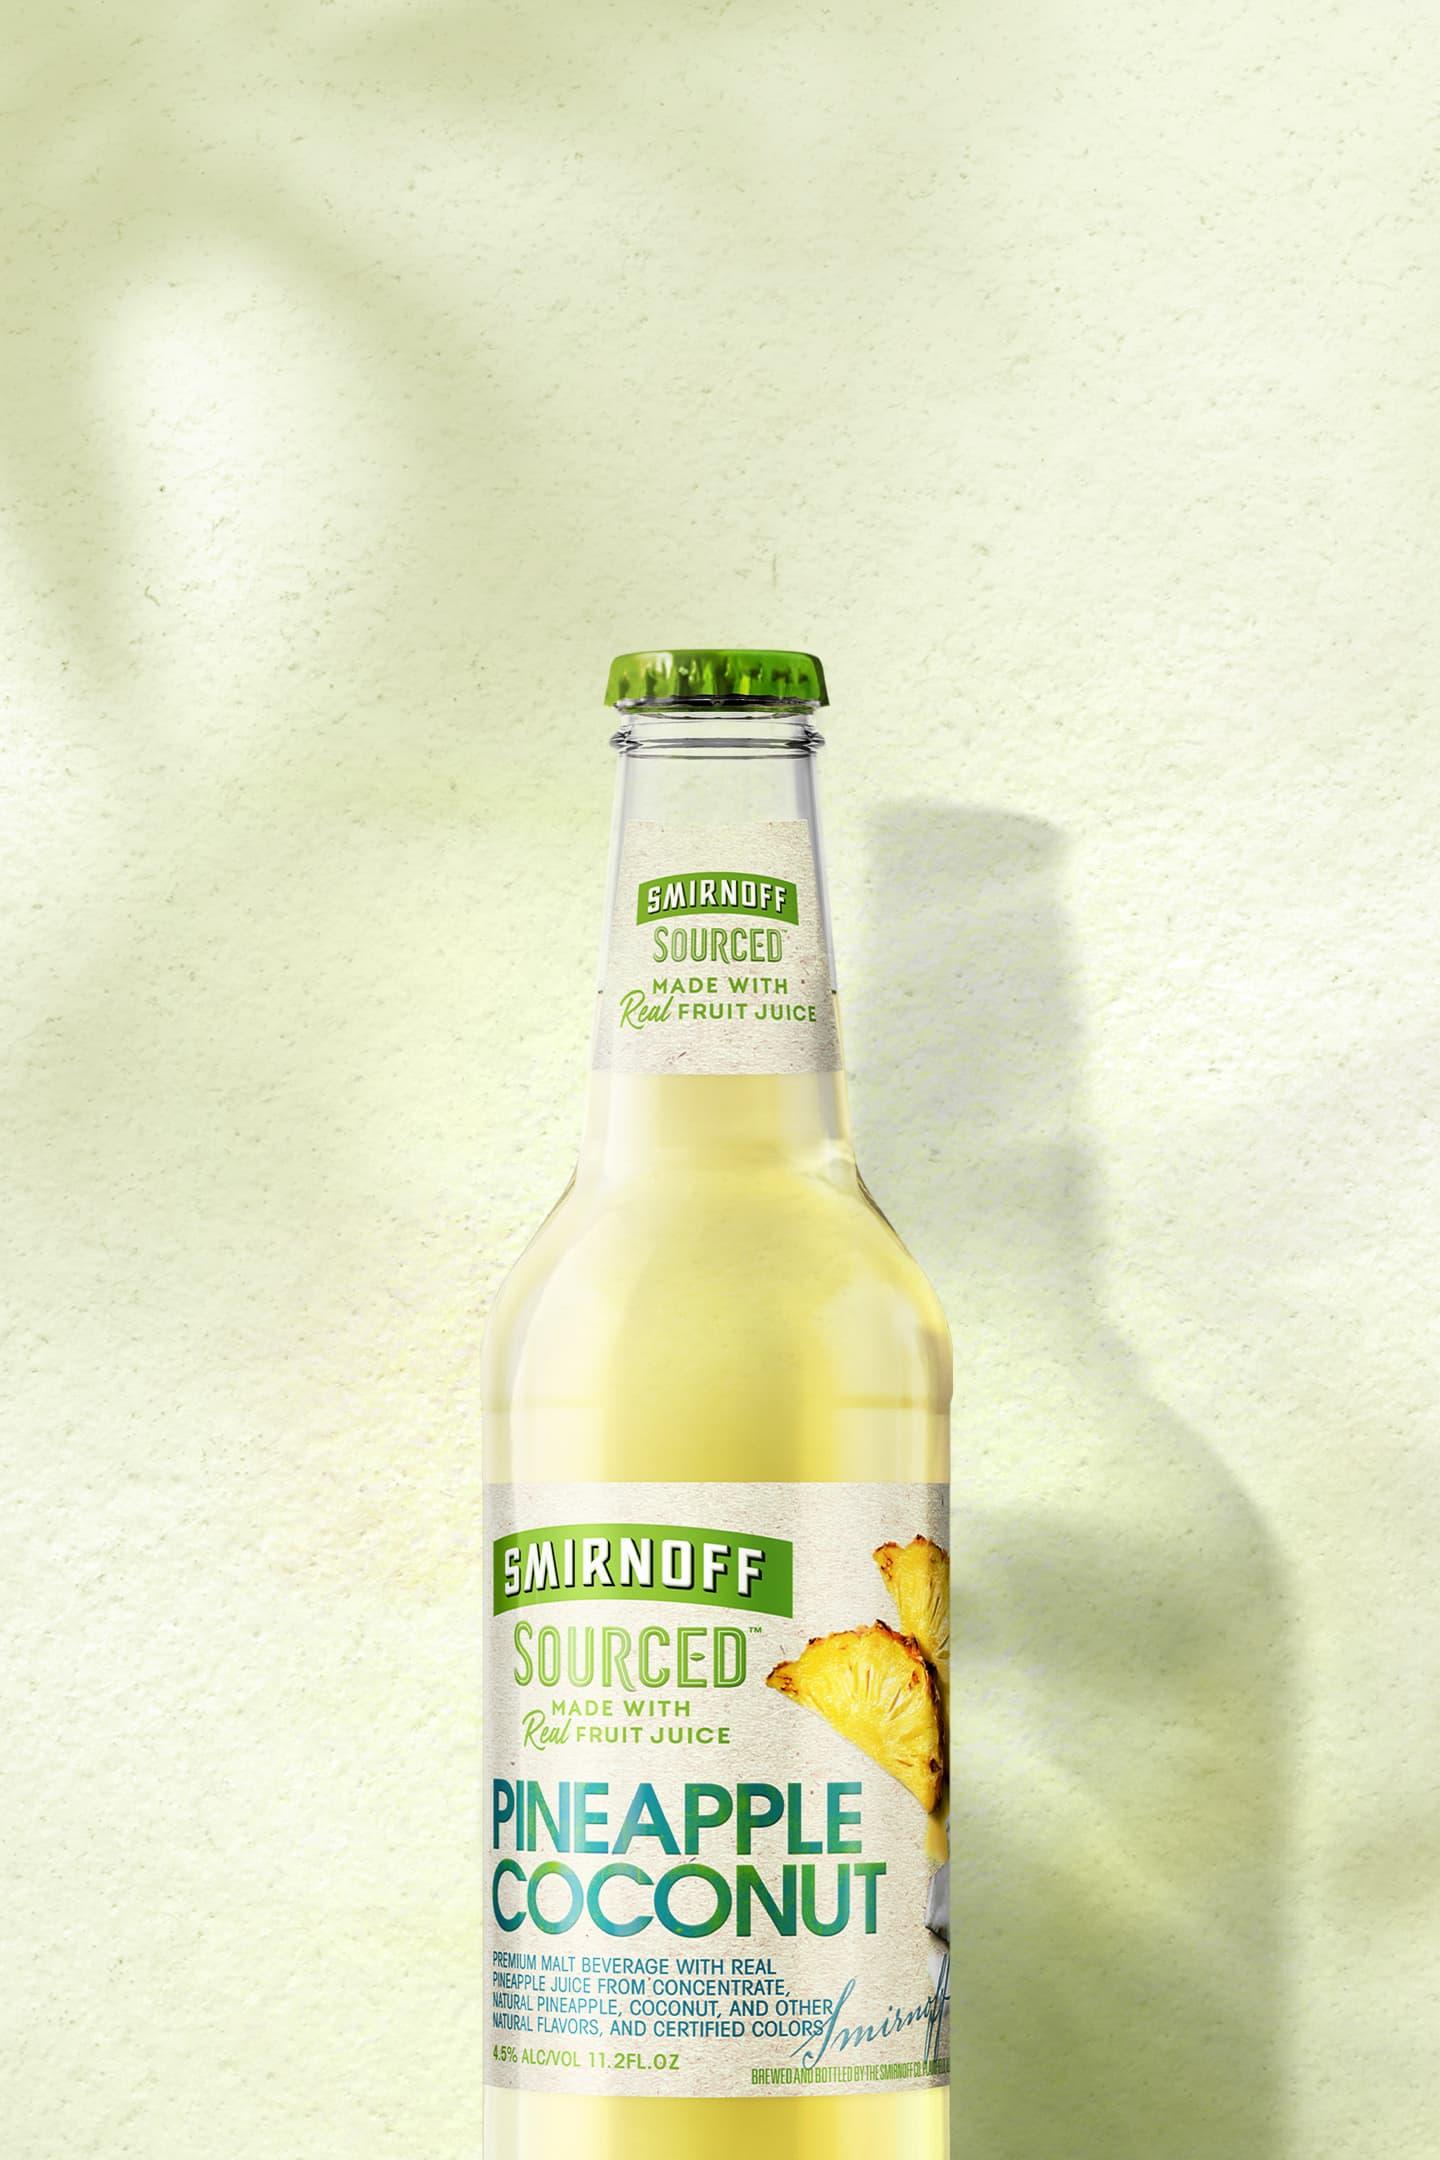 Smirnoff Sourced Pineapple Coconut on tropical background